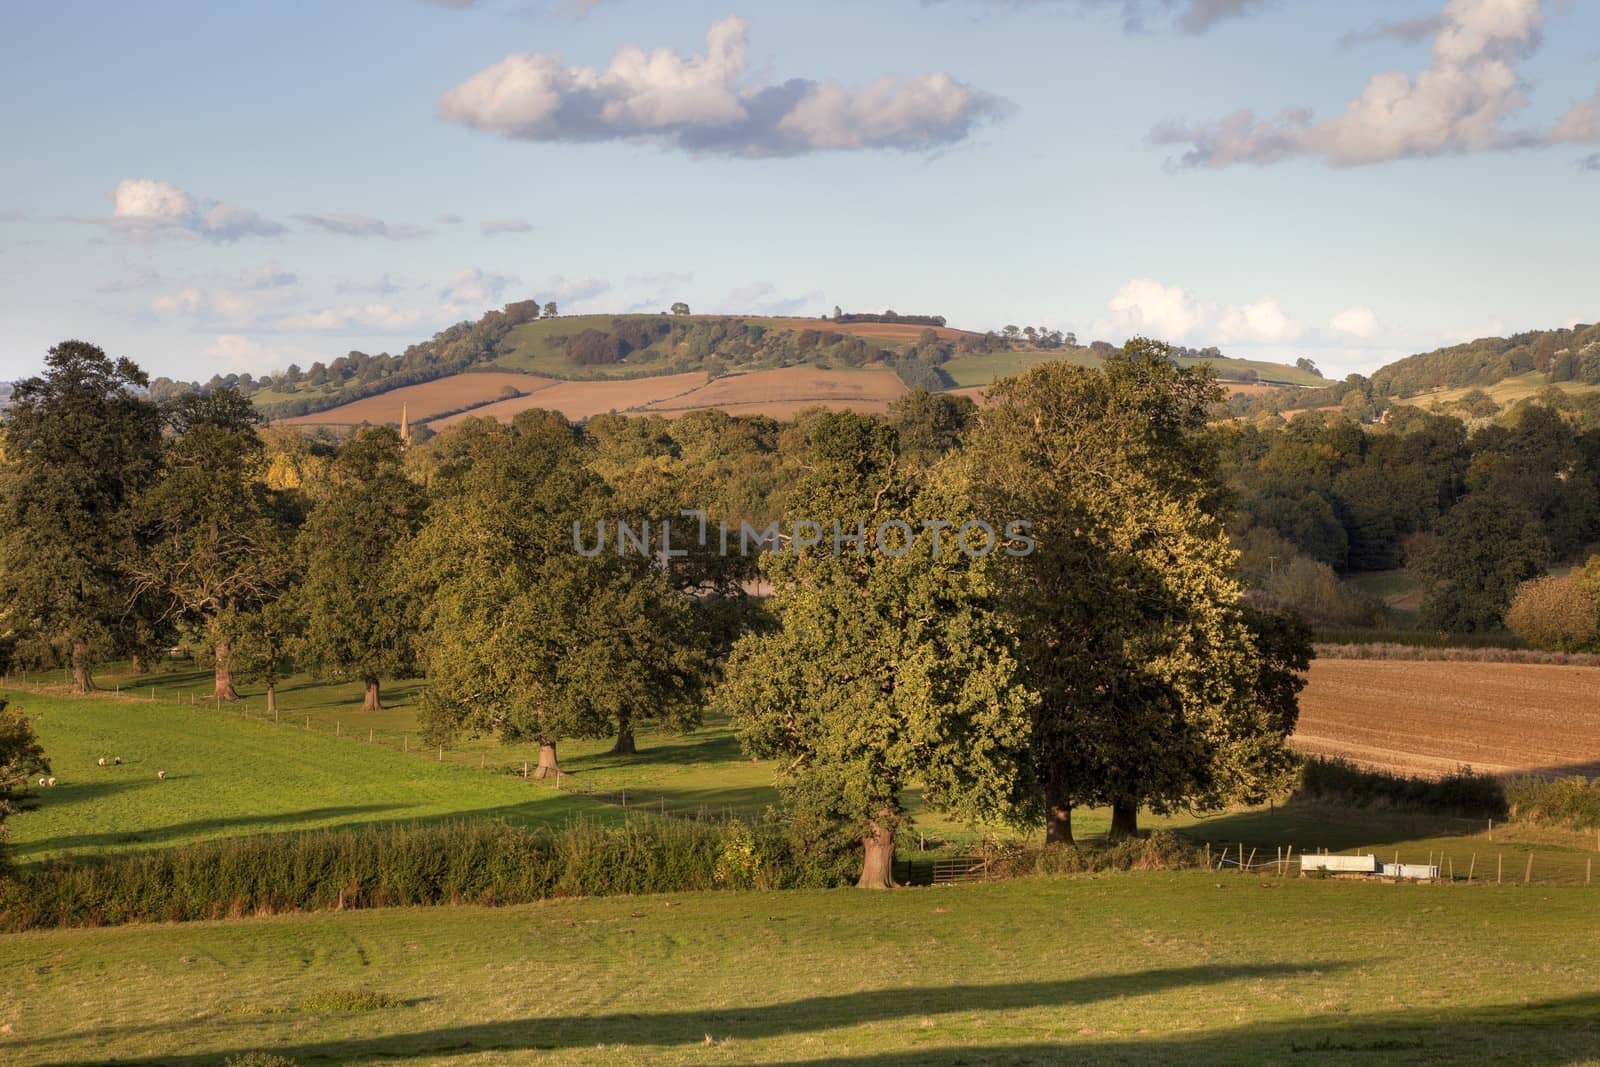 Looking past the spire at Mickleton towards Meon Hill on a spring evening, Chipping Campden, Gloucestershire, England.